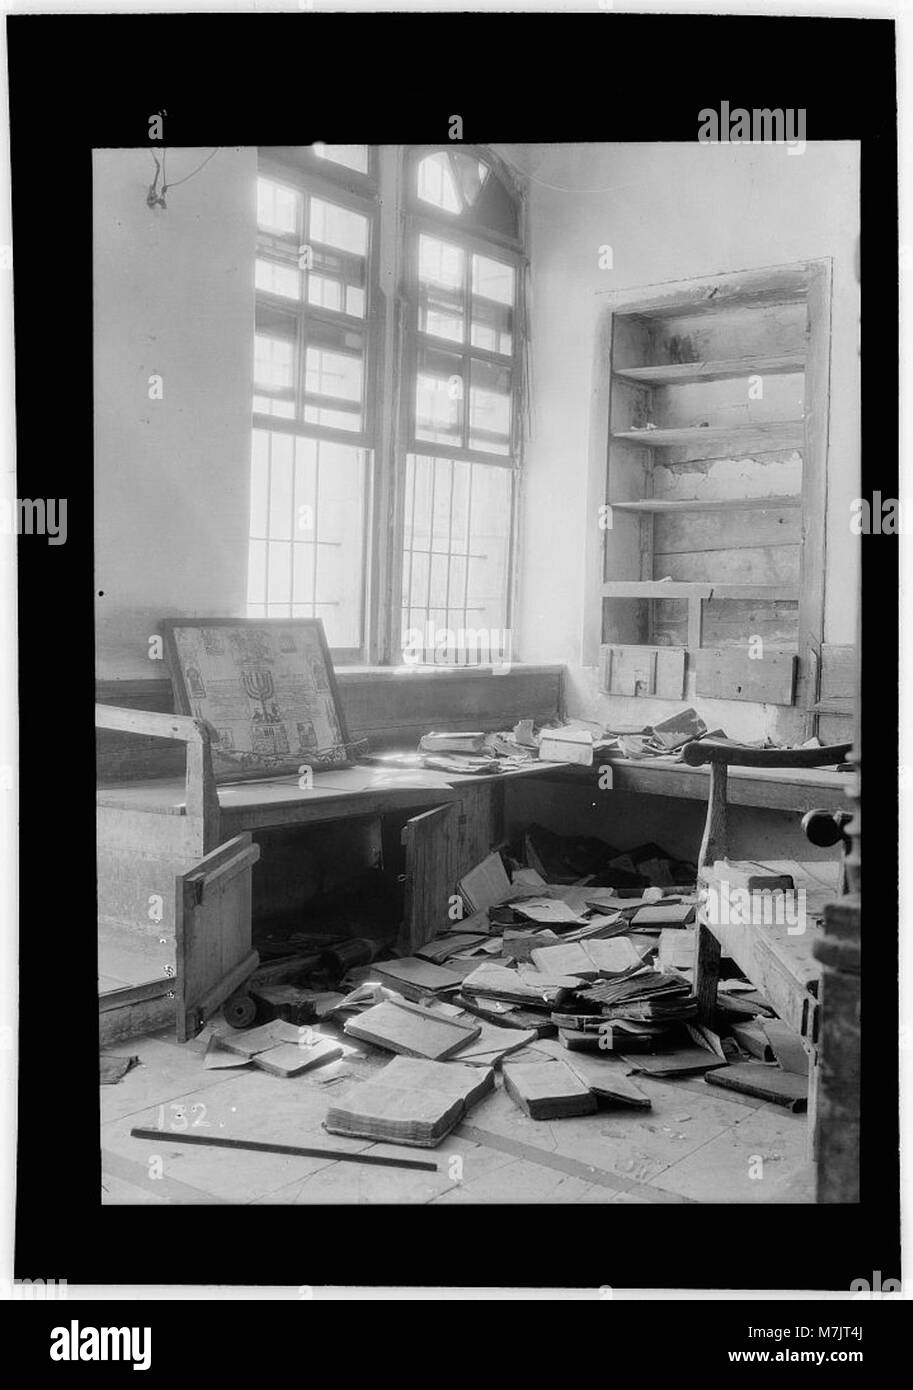 Palestine events. The 1929 riots, August 23 to 31. Synagogue desecrated by Arab rioters. Sacred books torn and scattered on the floor LOC matpc.15706 Stock Photo